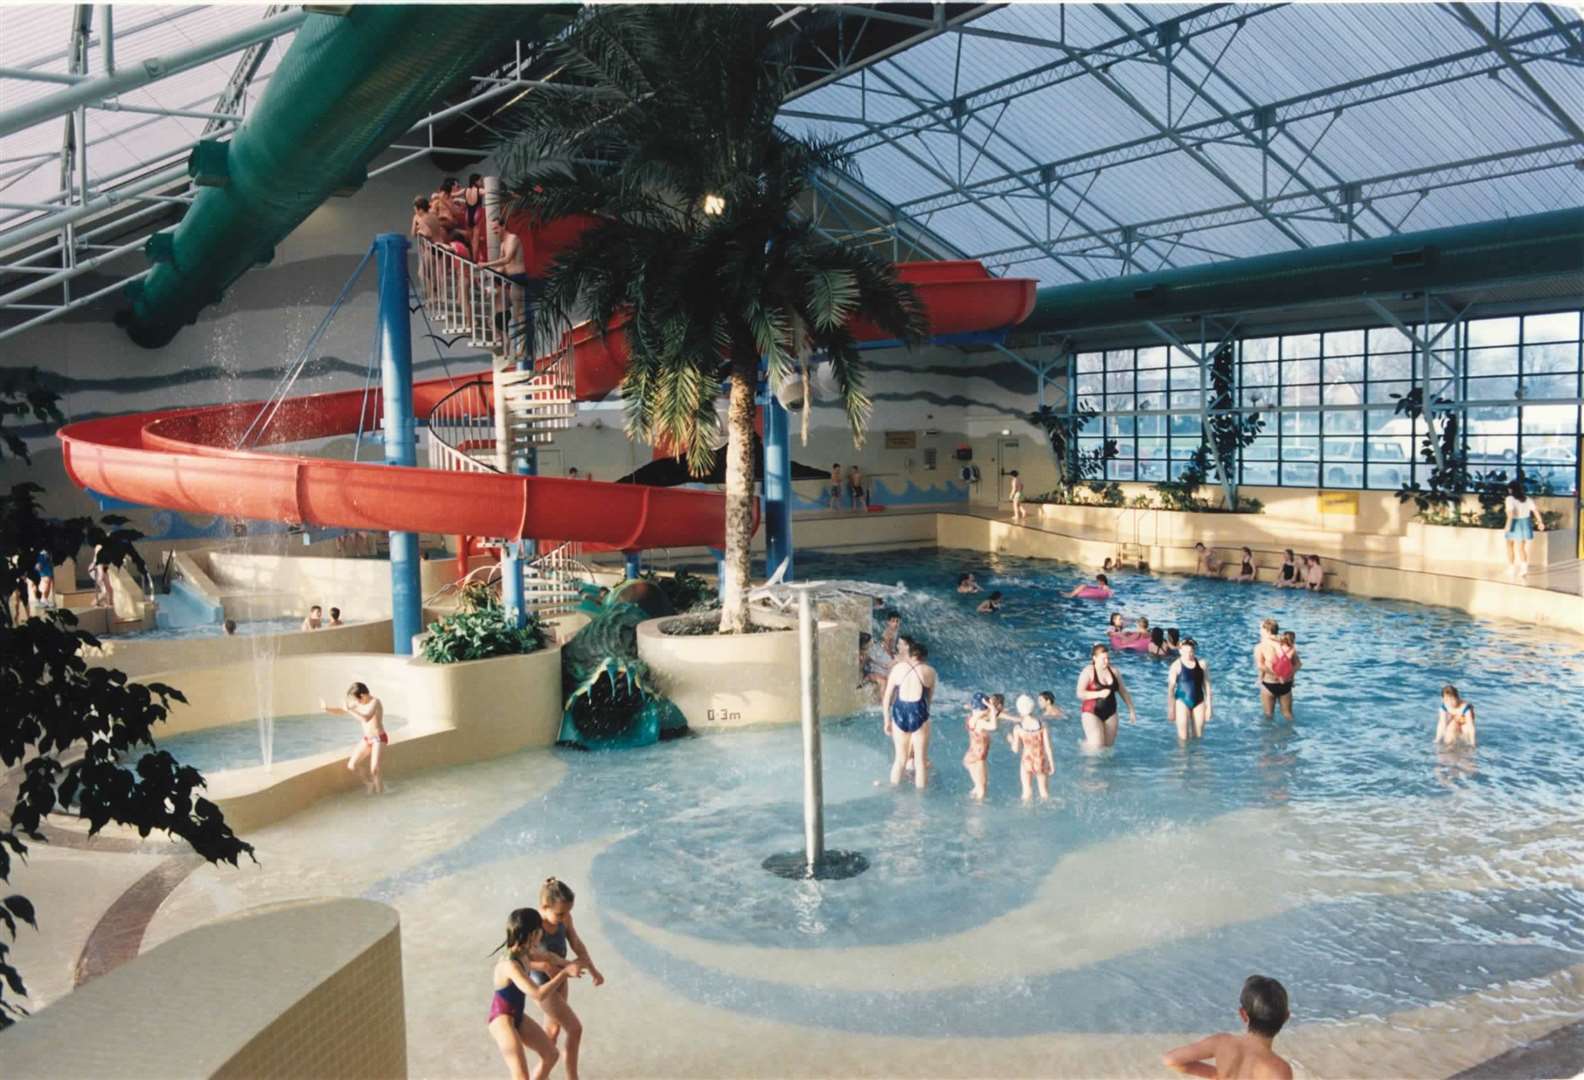 The pool, pictured here in the 90s, has flumes and a wave machine